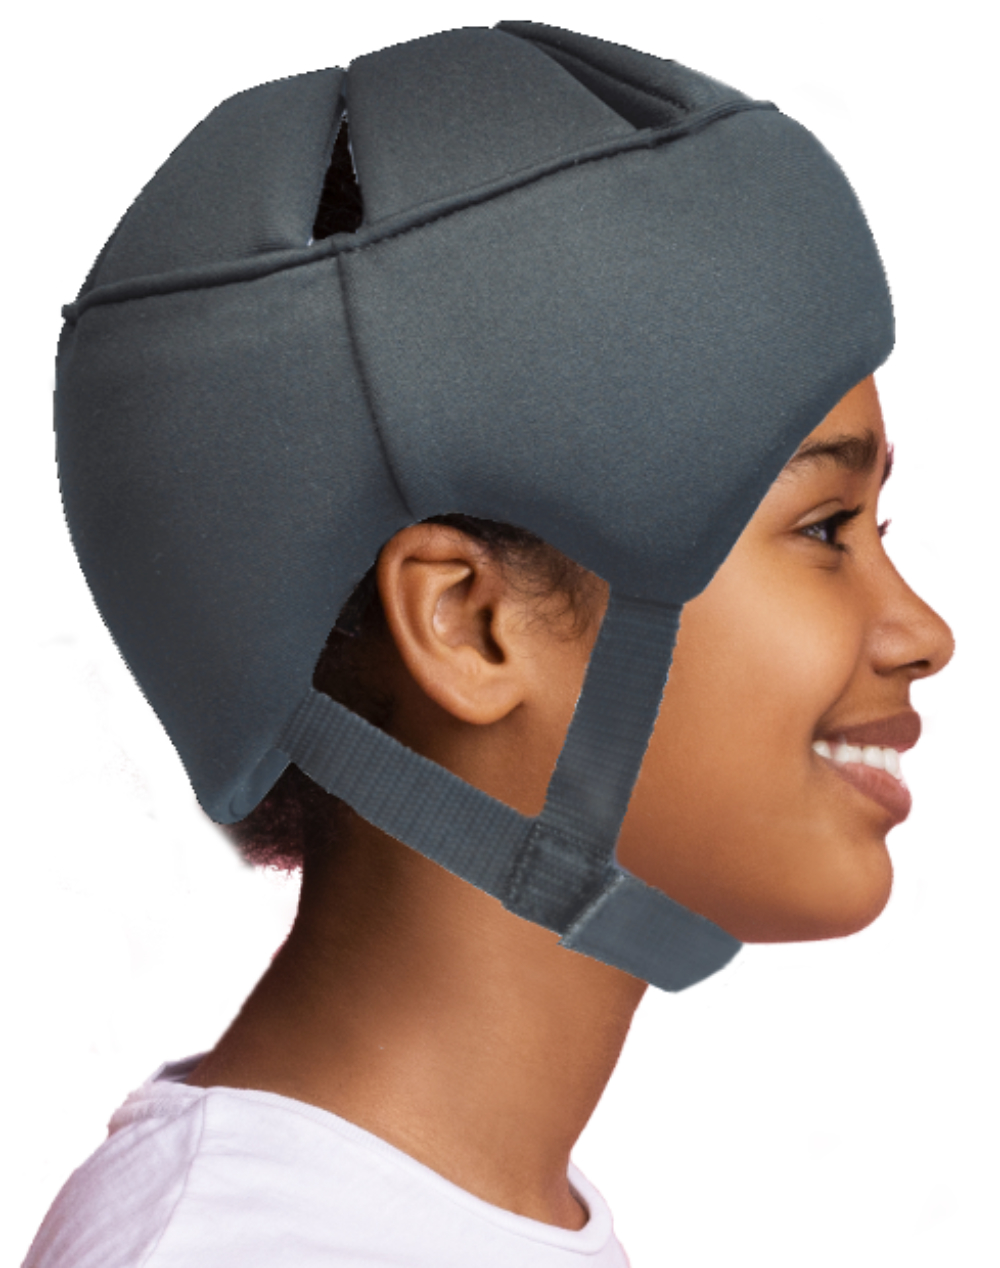 Aqua Head Protection For Swimmers